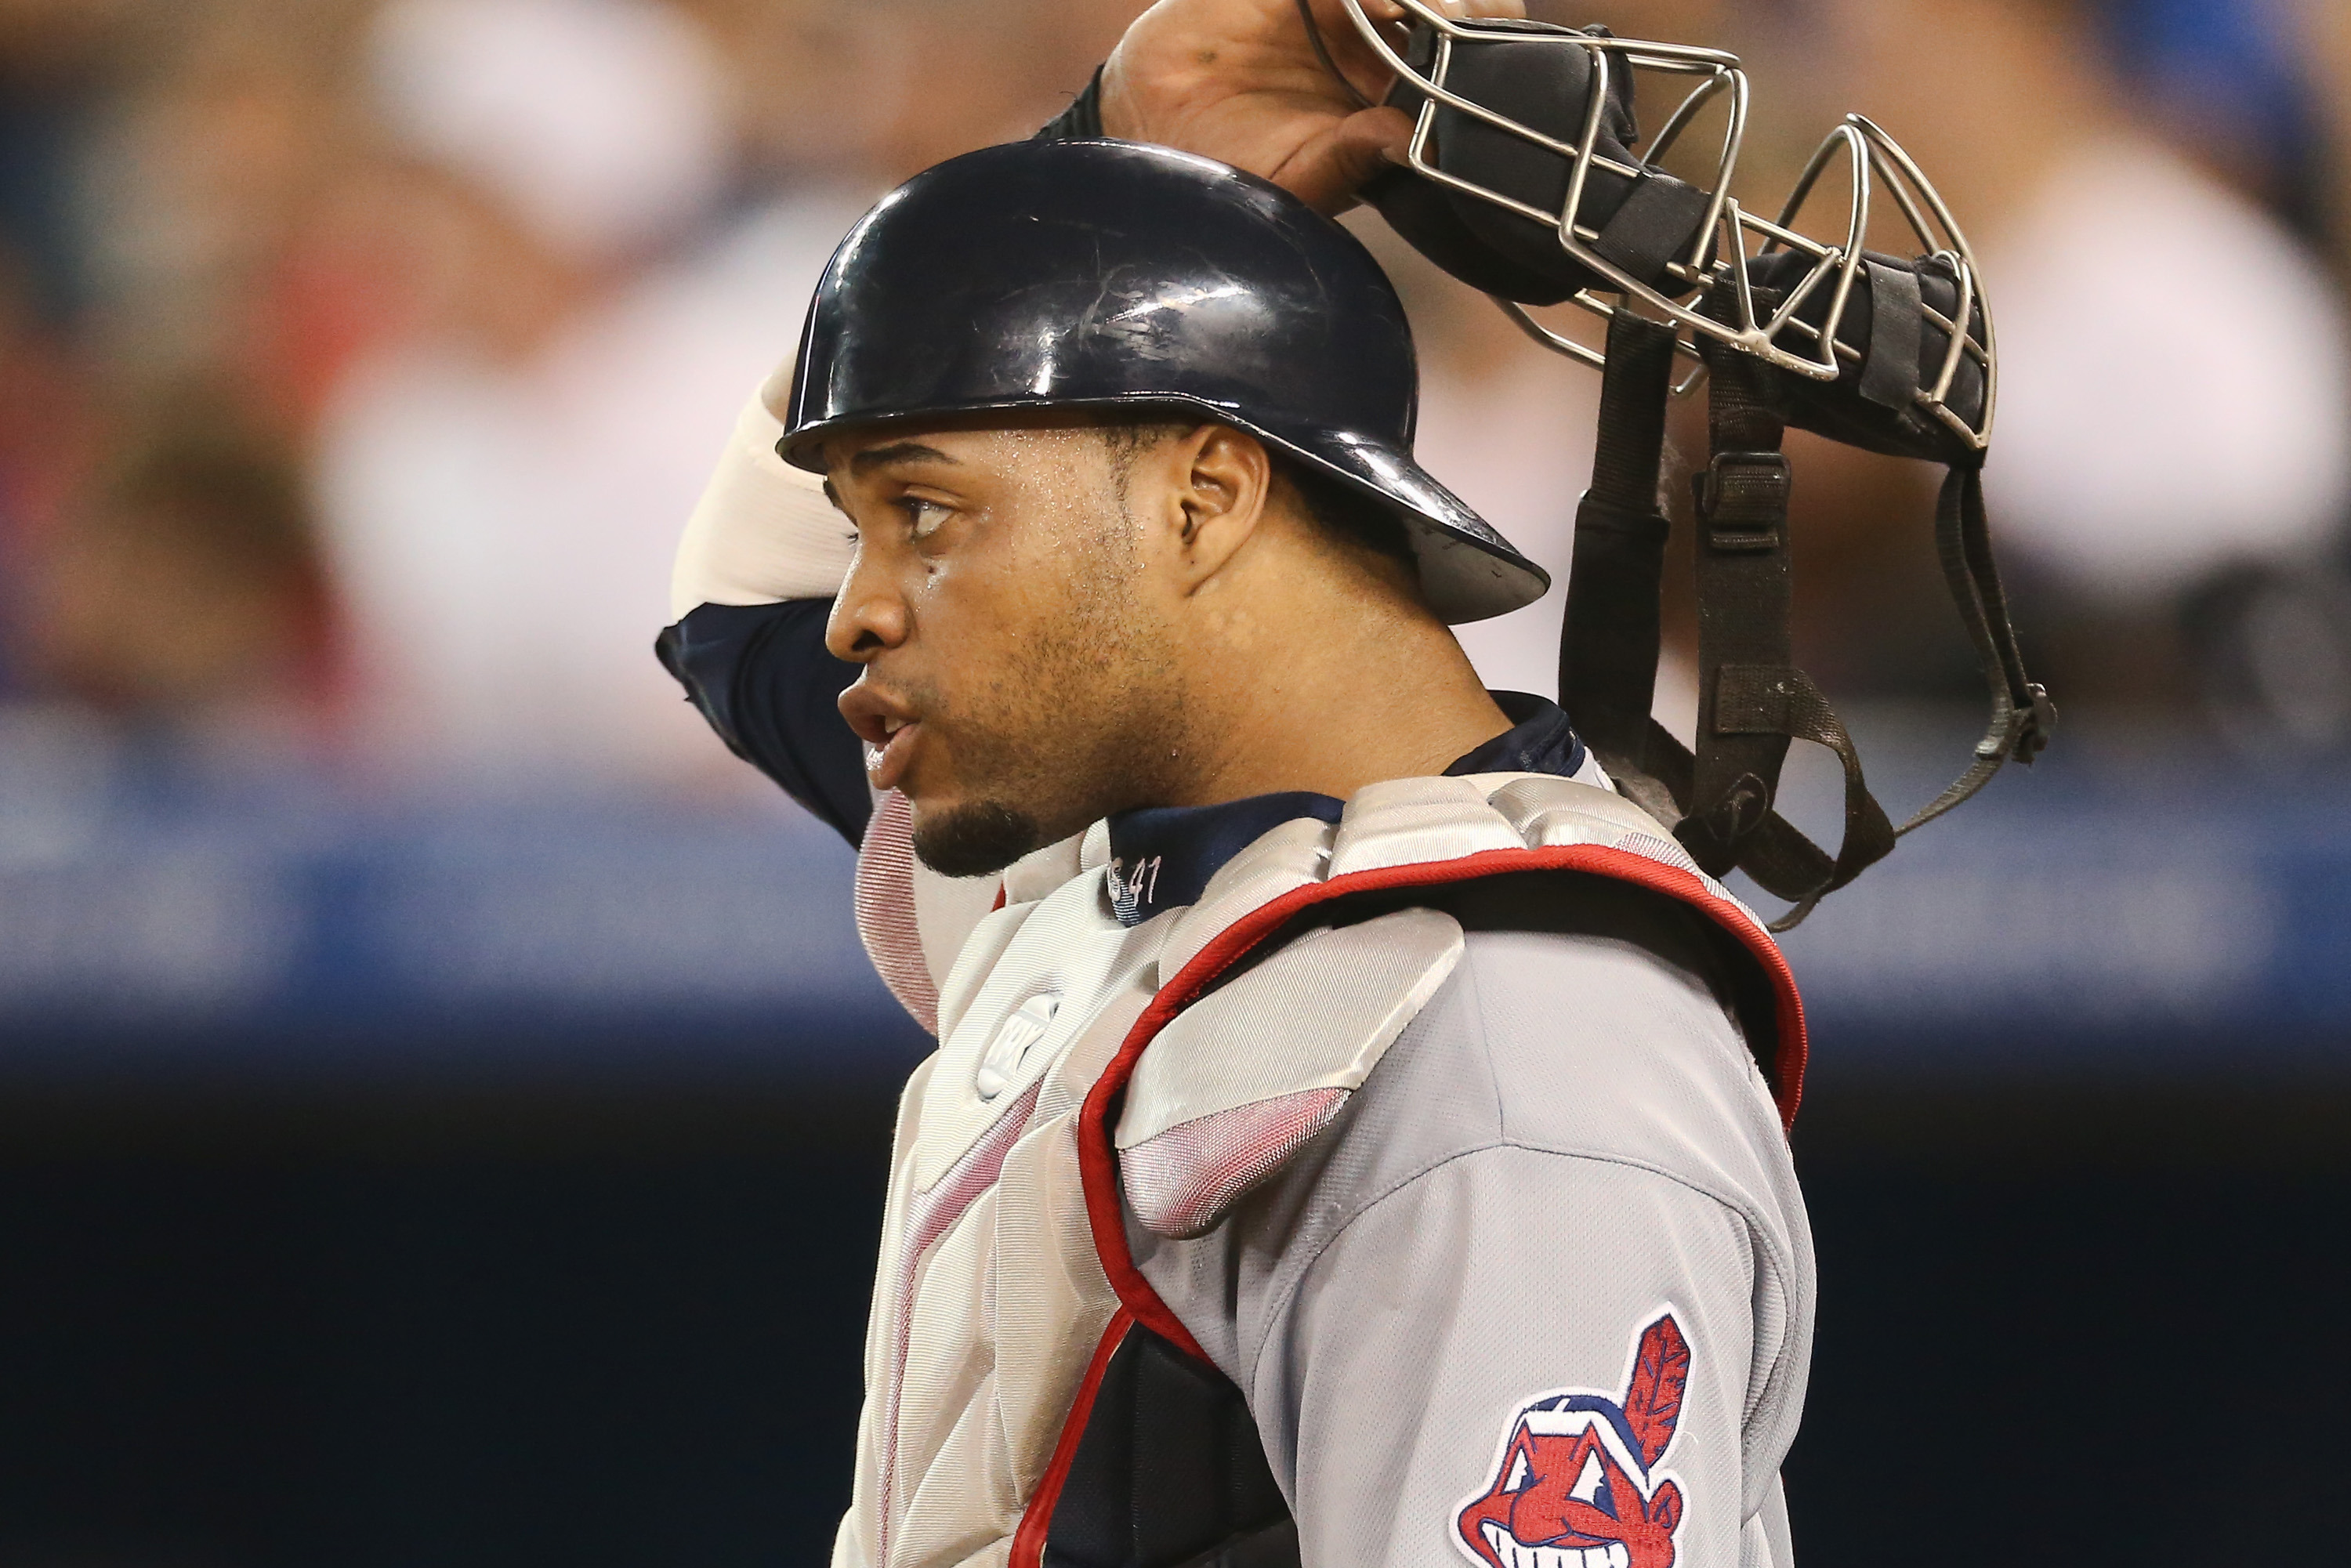 Cleveland Indians welcome Carlos Santana back with hugs and cheers